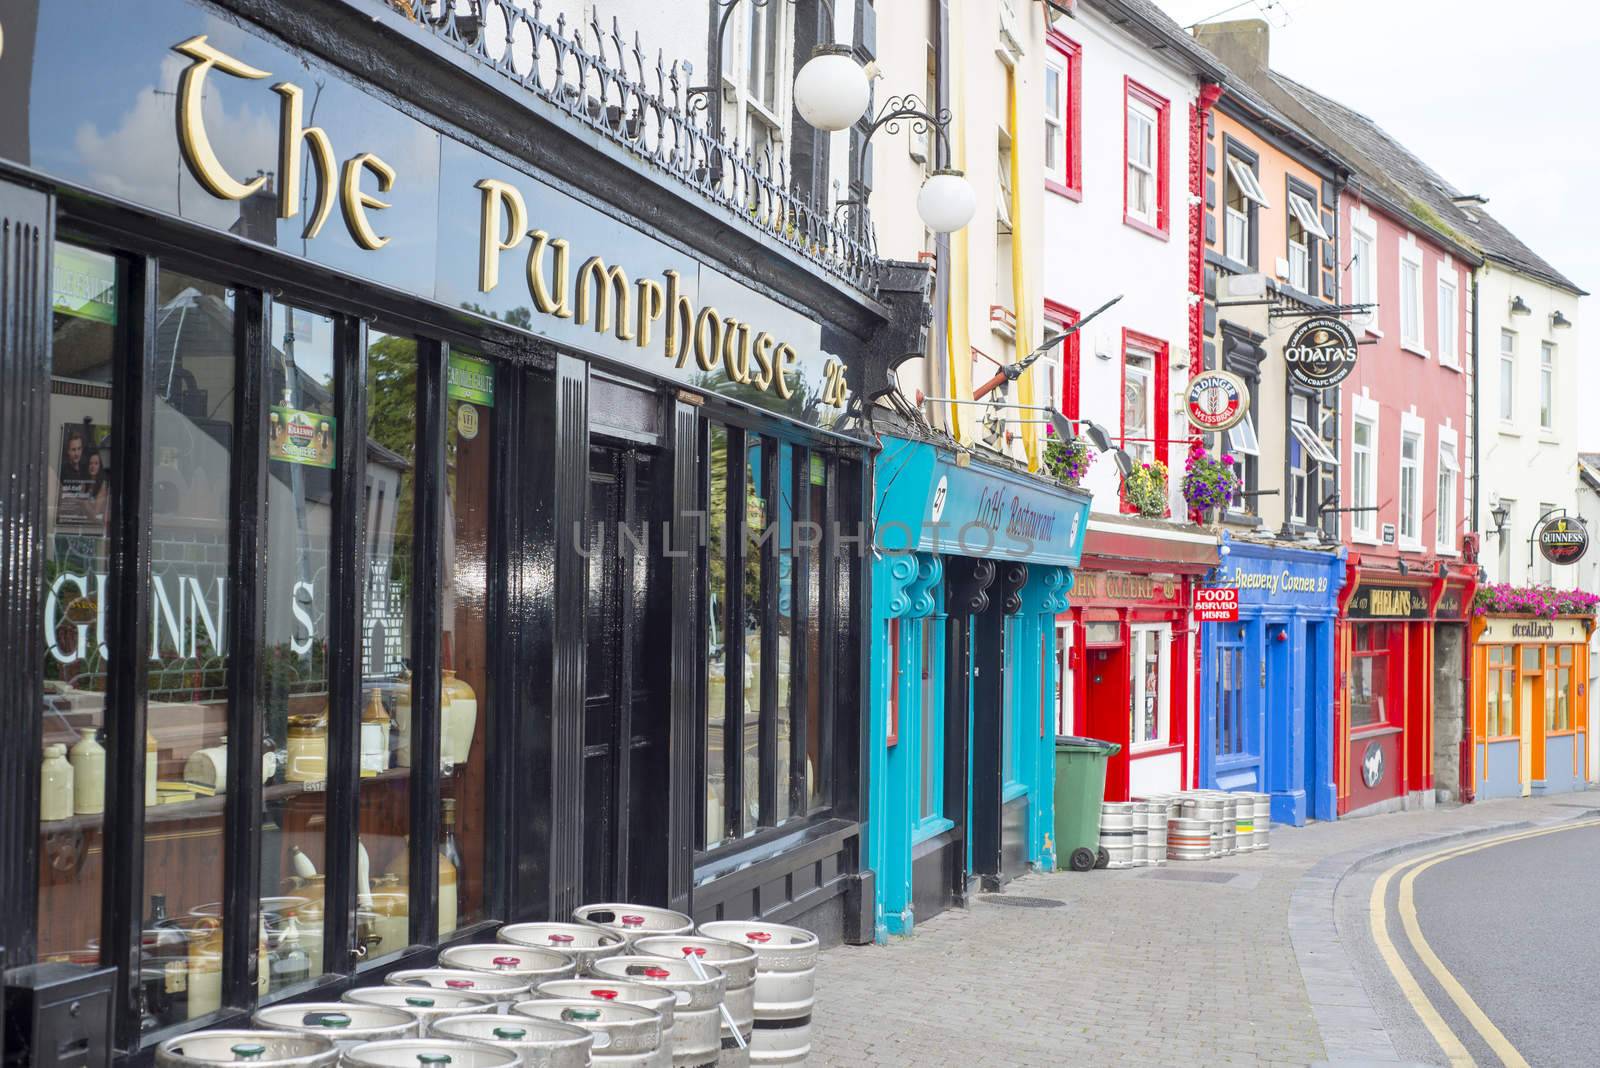 irish pubs and retaurant fronts by morrbyte